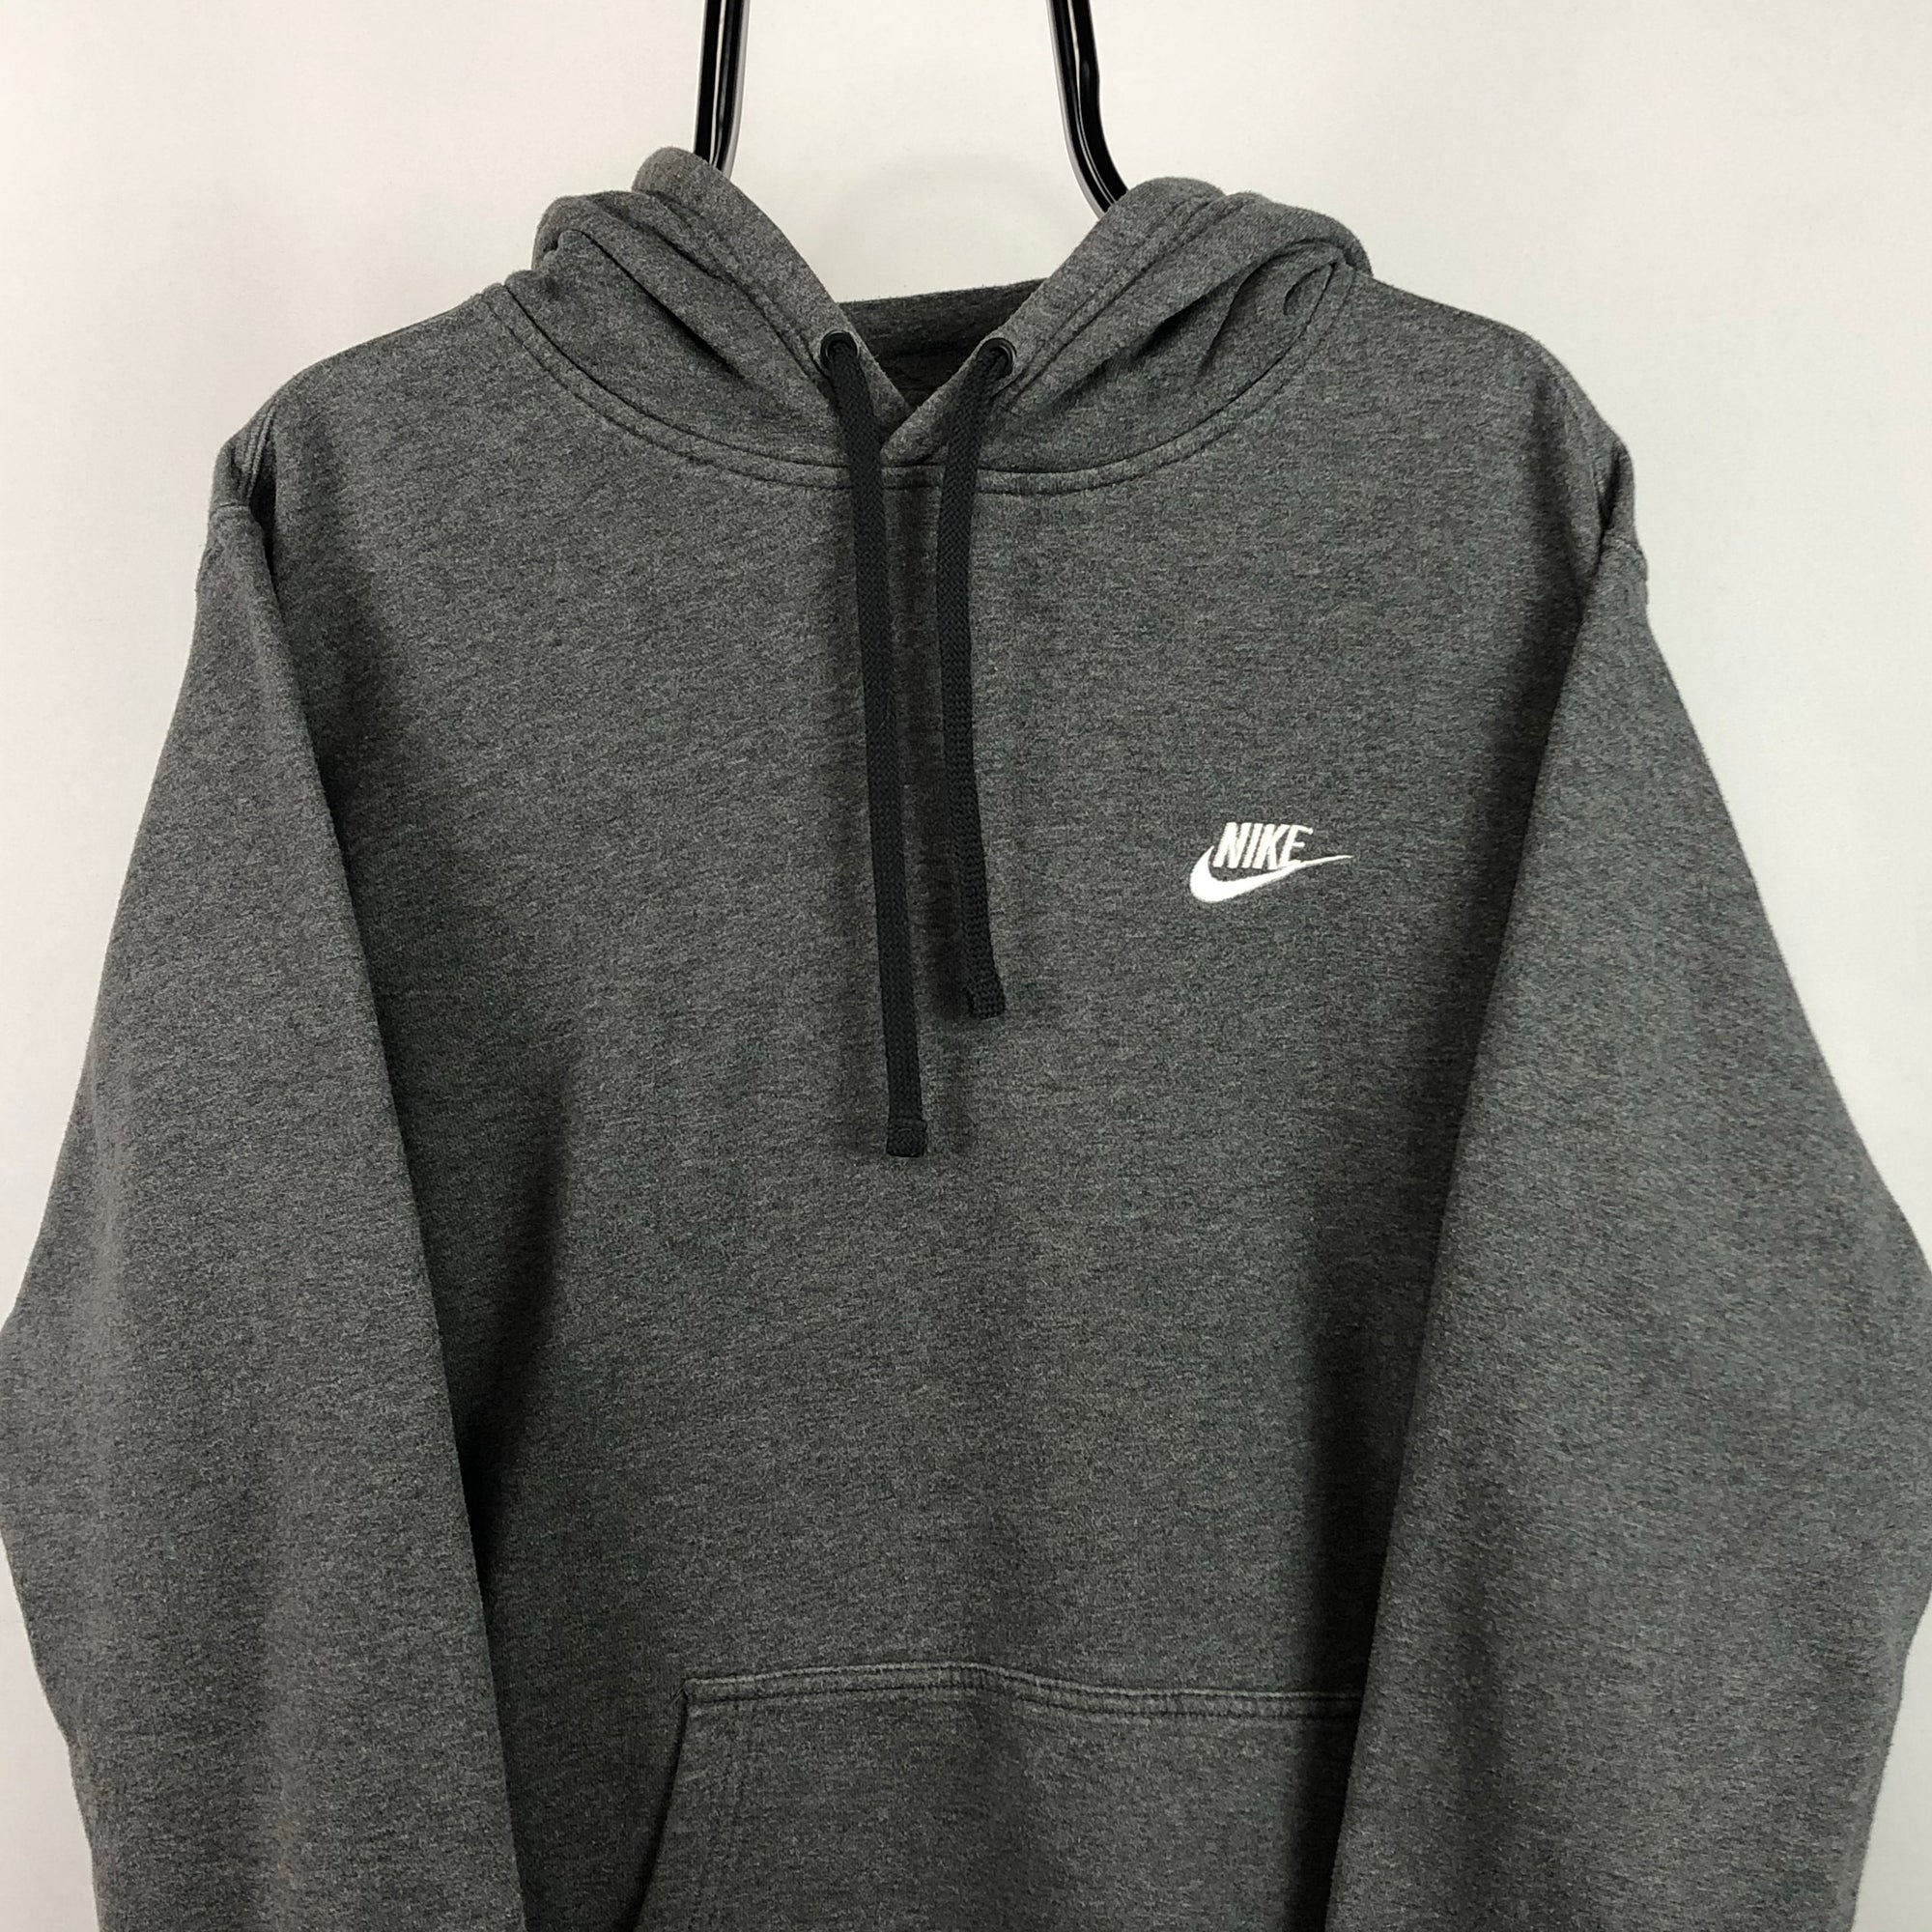 Nike Embroidered Small Logo Hoodie in Grey - Men’s Large/Women’s XL